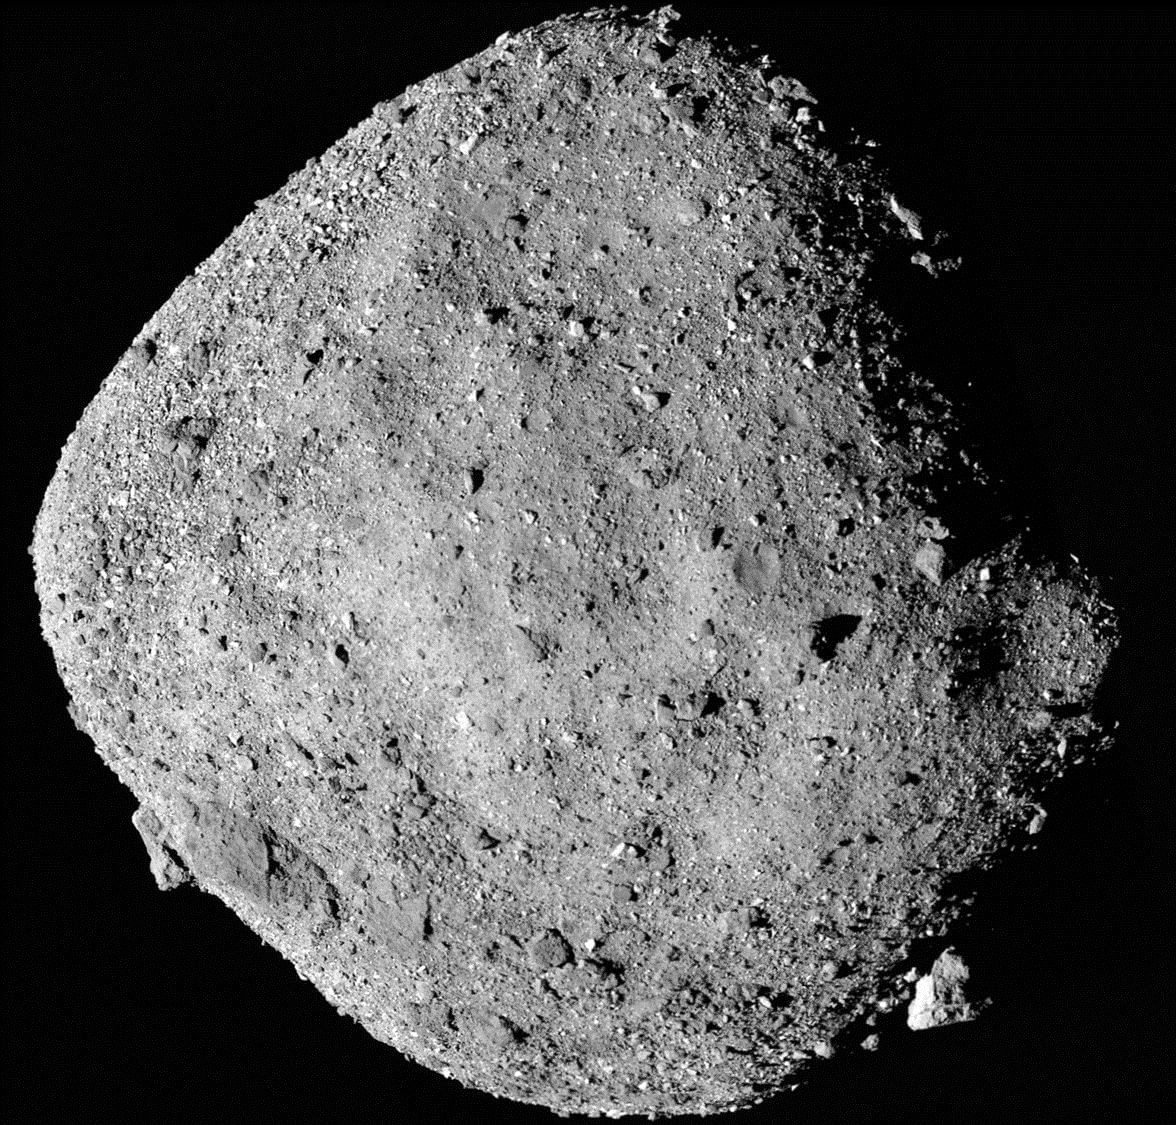 This mosaic image of asteroid Bennu, composed of 12 PolyCam images collected on 2 December 2018 by the OSIRIS-REx spacecraft from a range of 15 miles (24 km). Photo: Reuters